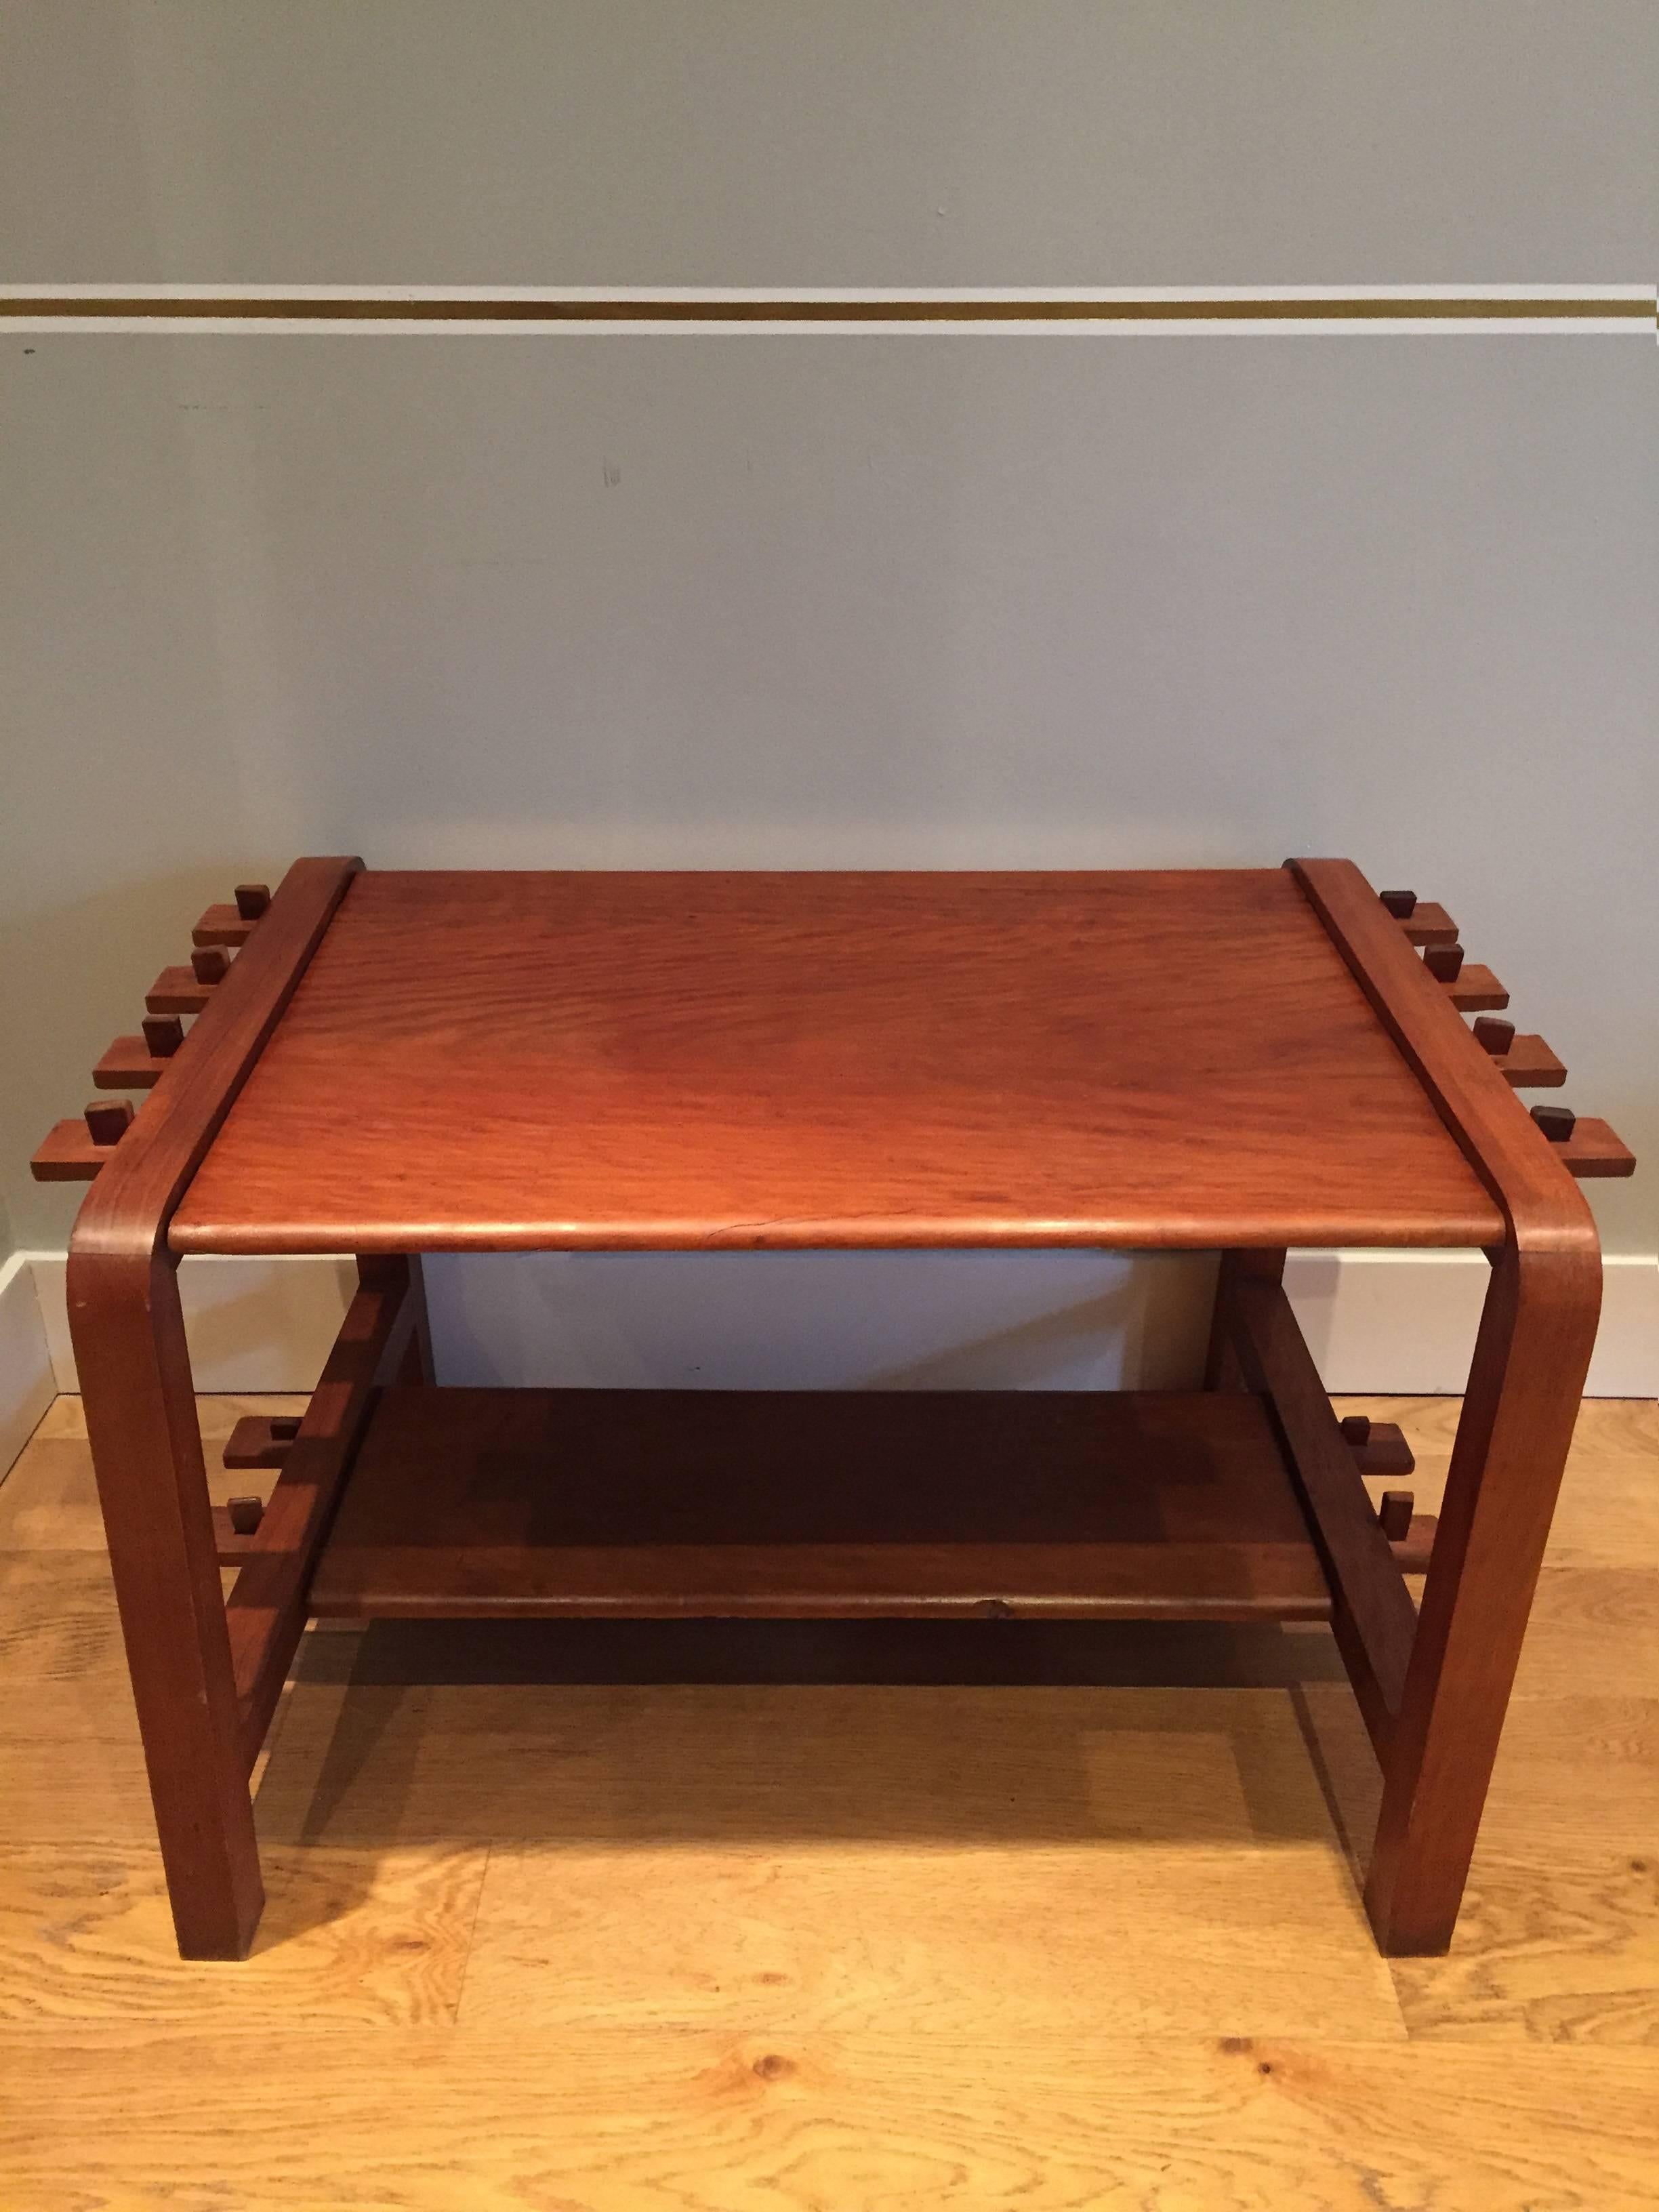 A most unusual modernist cherrywood coffee table, entirely dismantable with a system of pegs, the two D shaped side structures supporting the top and a lower shelf,
France, circa 1940.
Measures: 90 cm long by 58 cm wide by 55 cm high.